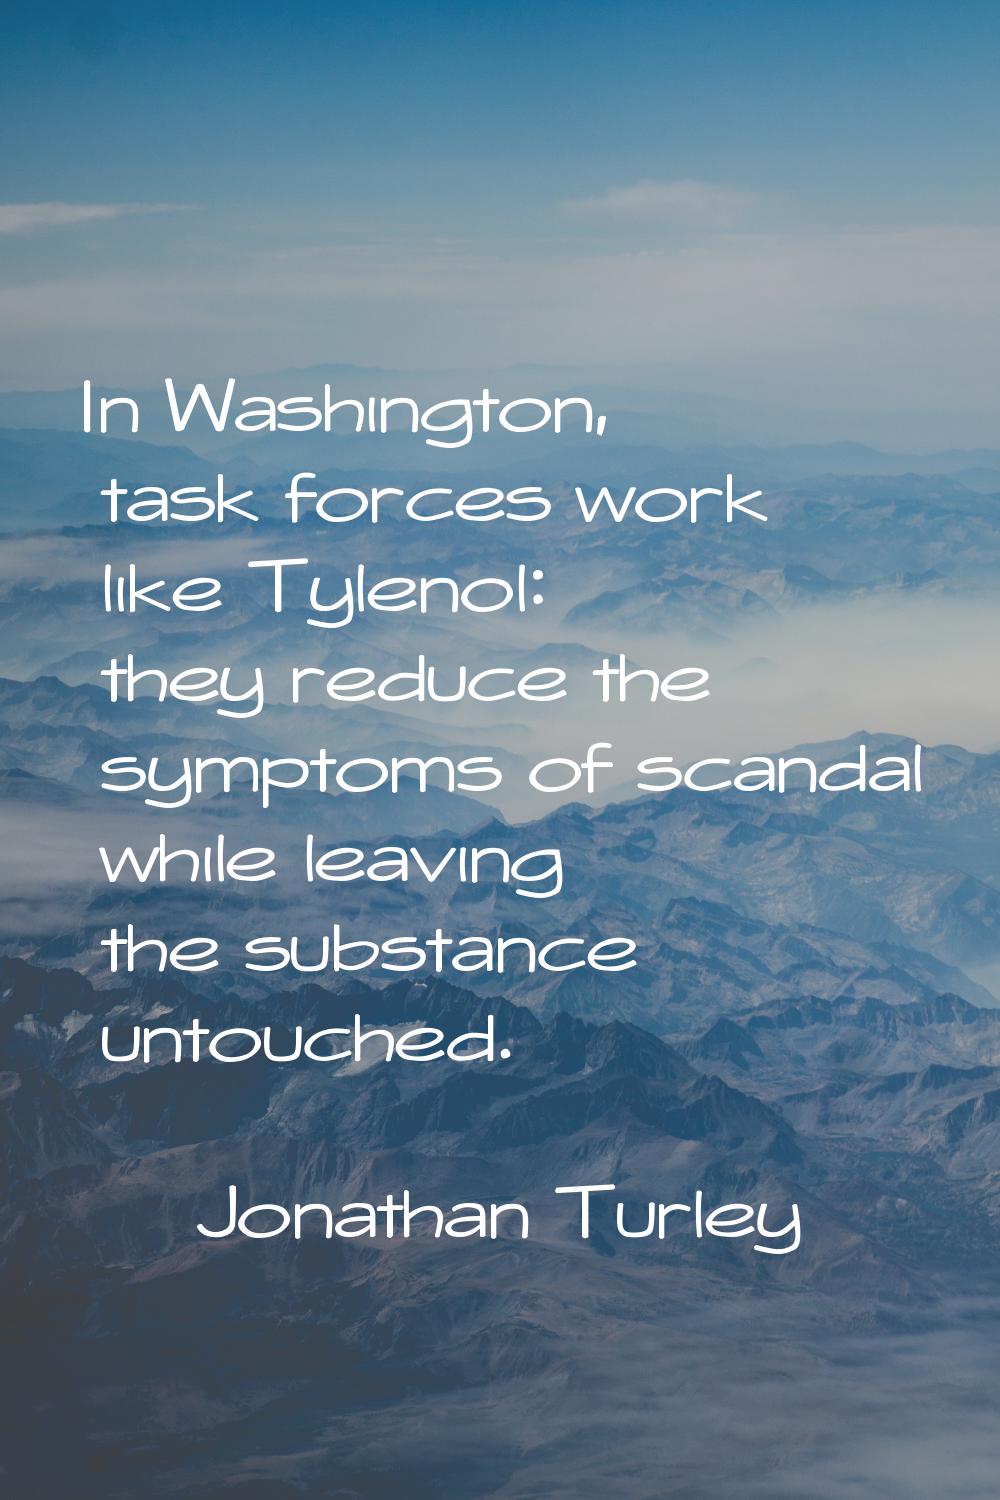 In Washington, task forces work like Tylenol: they reduce the symptoms of scandal while leaving the